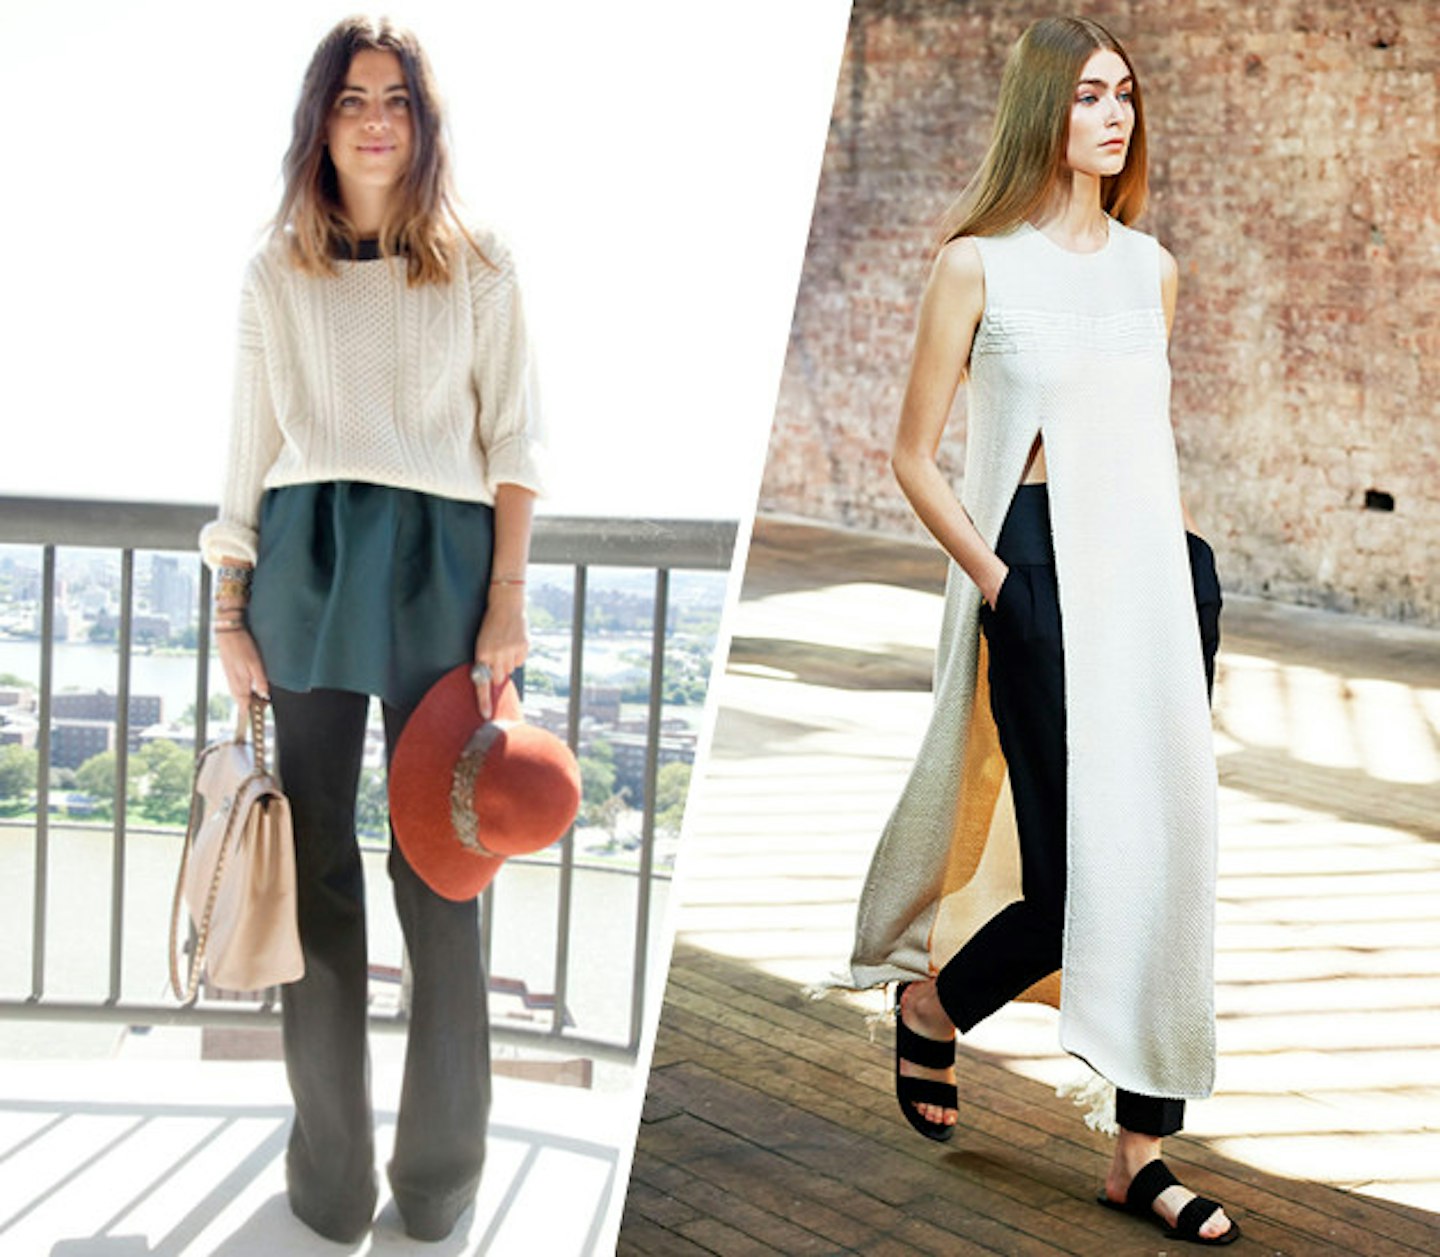 Skirt Trousers Are Back. Yes, Honestly.